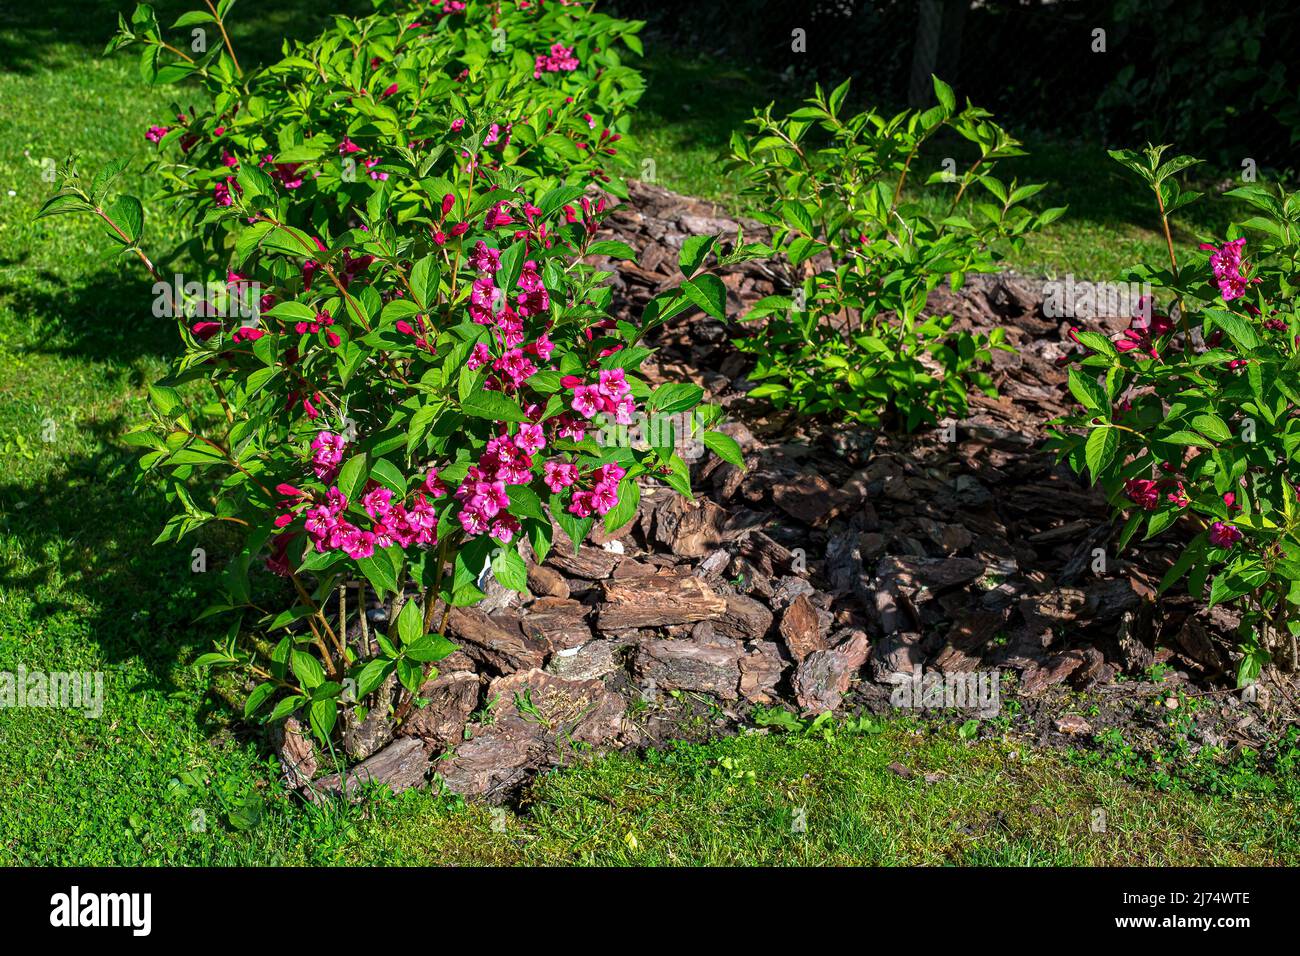 garden bed with mulched tree bark blooming flowers with green leaves on a sunny spring day in the backyard close-up of a plant. Stock Photo